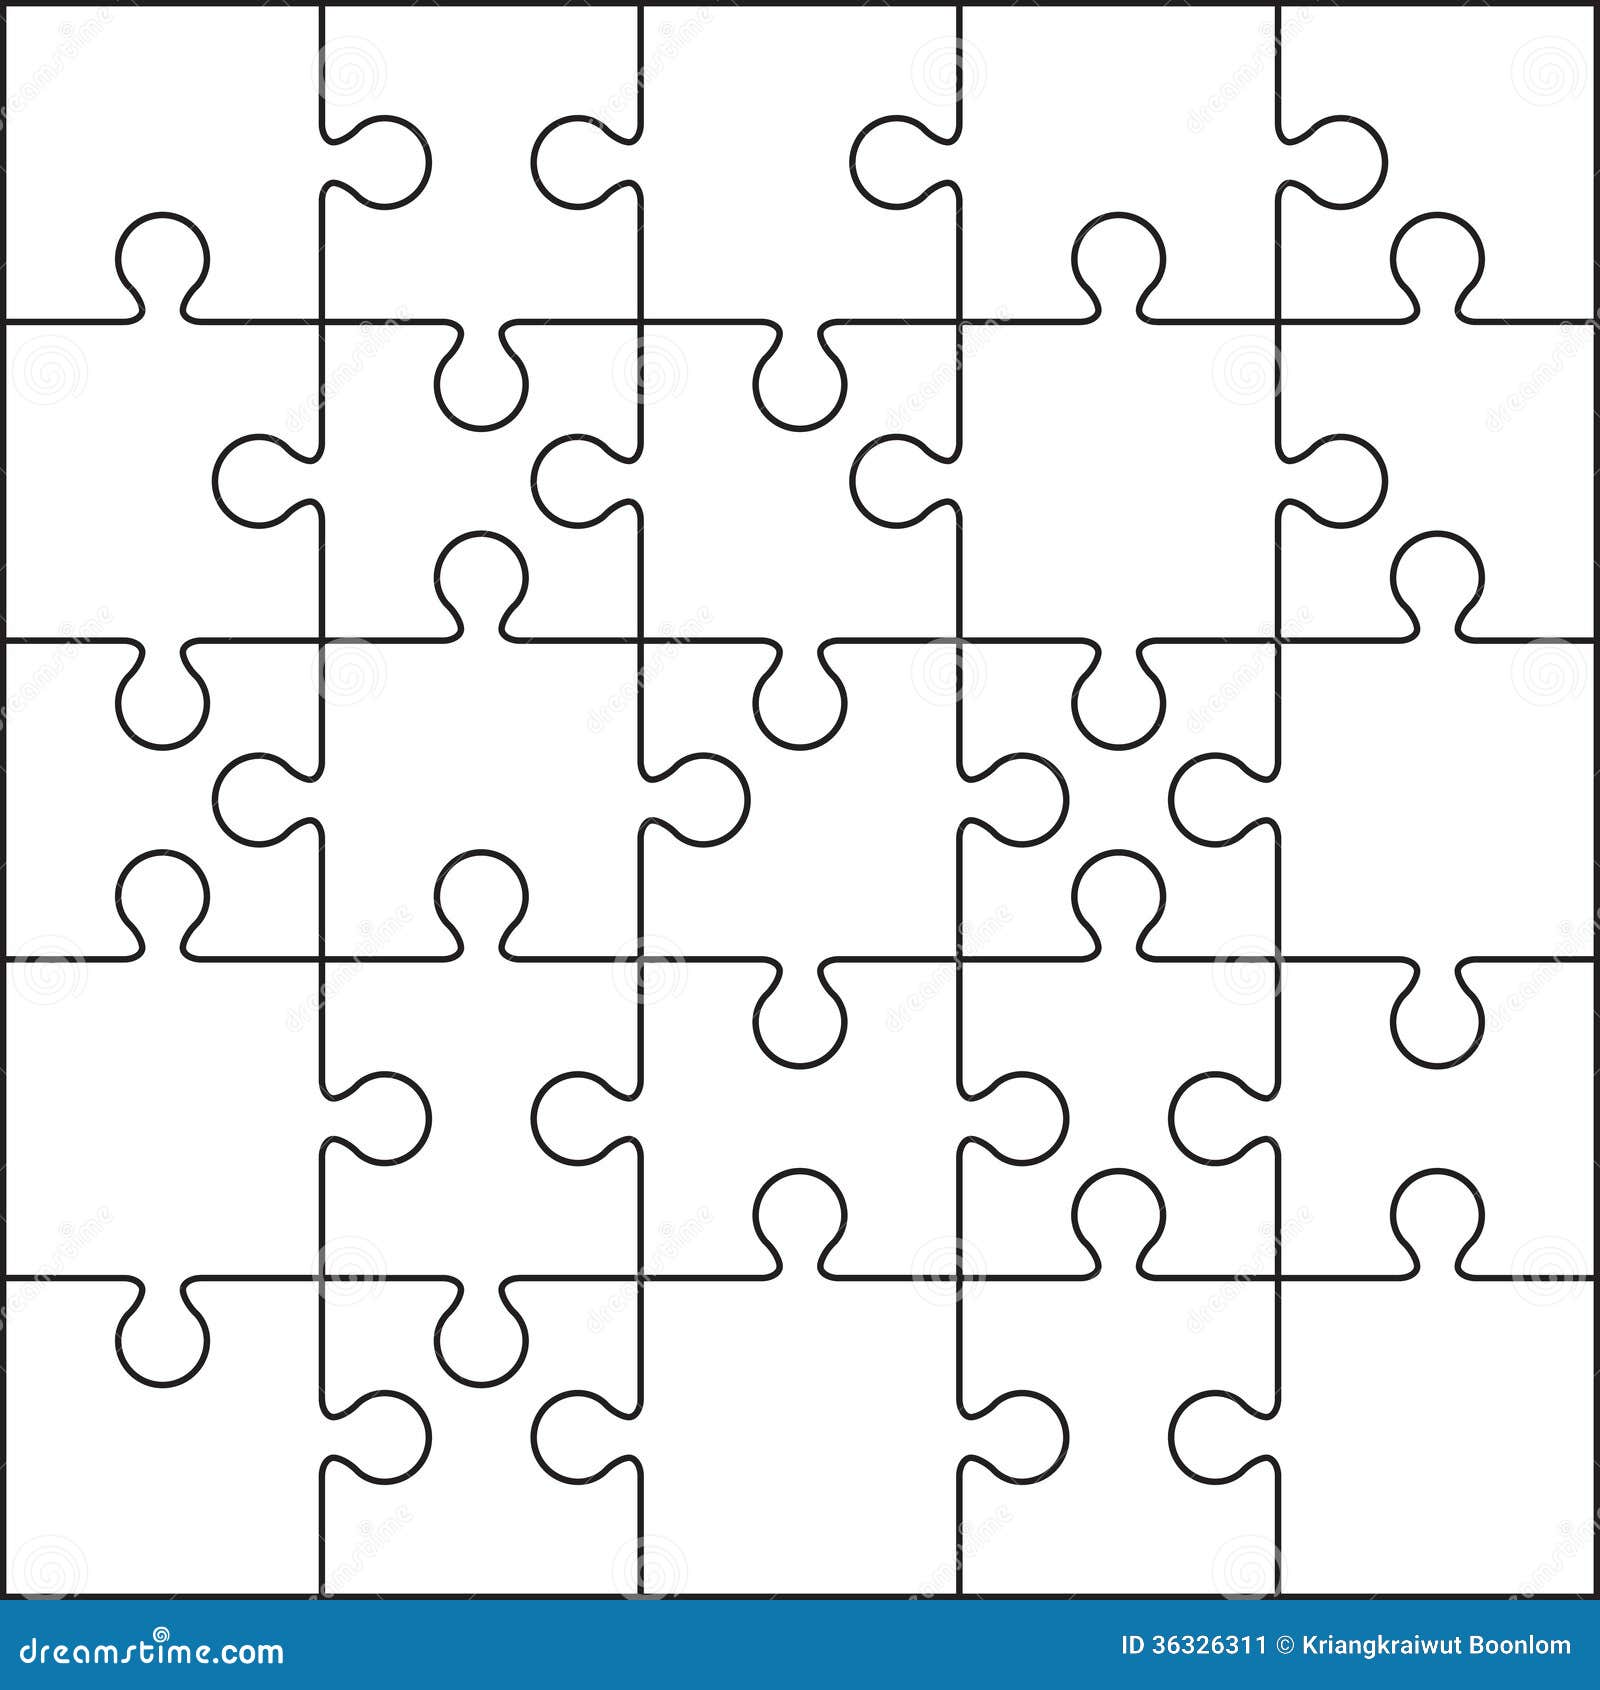 Jigsaw puzzle template free download amd graphics driver for windows 10 64 bit free download